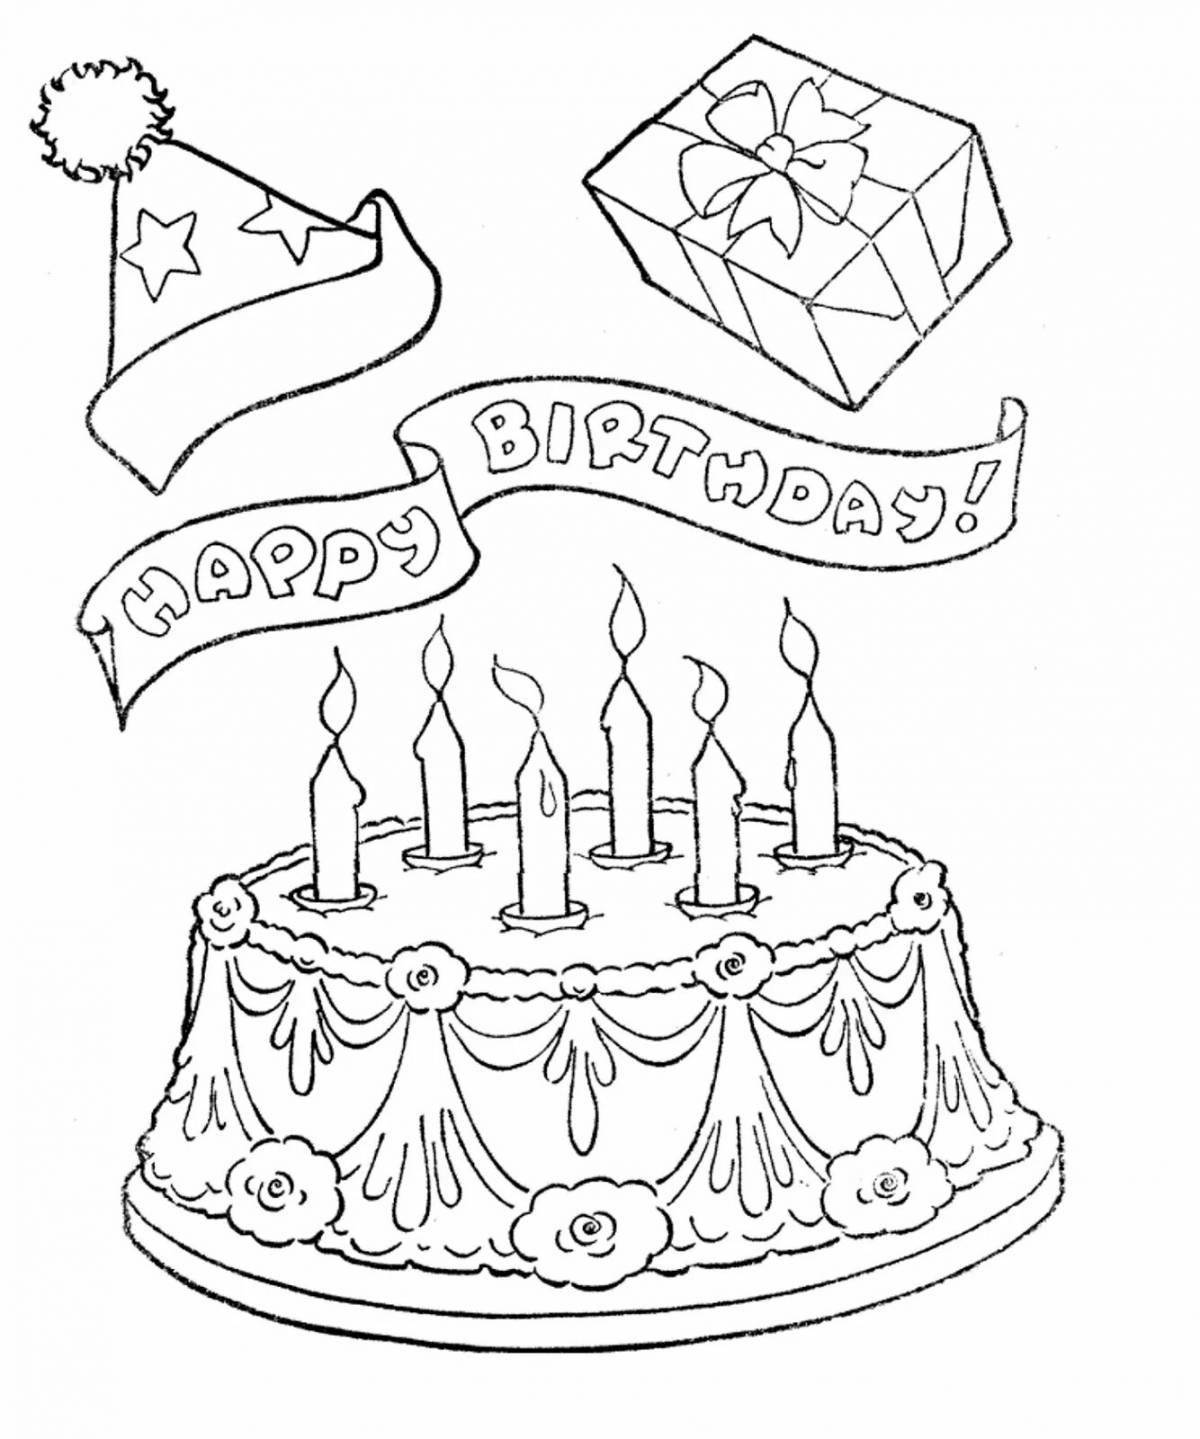 Ornate godmother's birthday coloring page